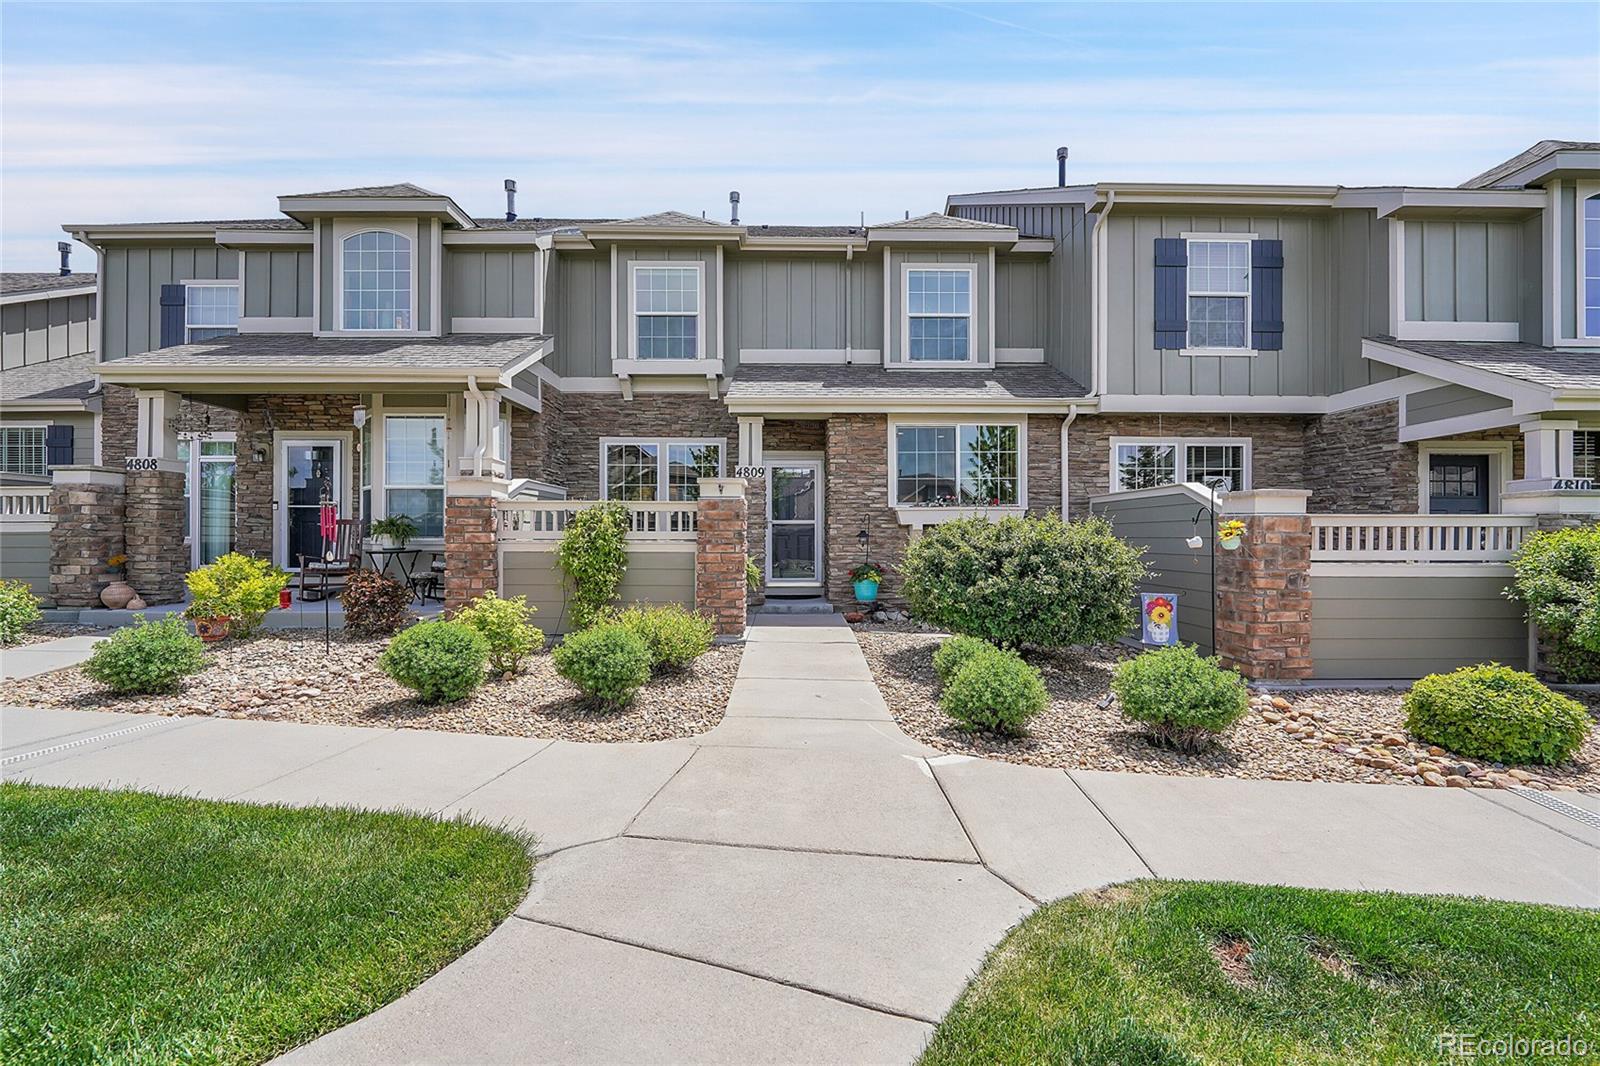 4809  raven run, Broomfield sold home. Closed on 2024-07-24 for $575,000.